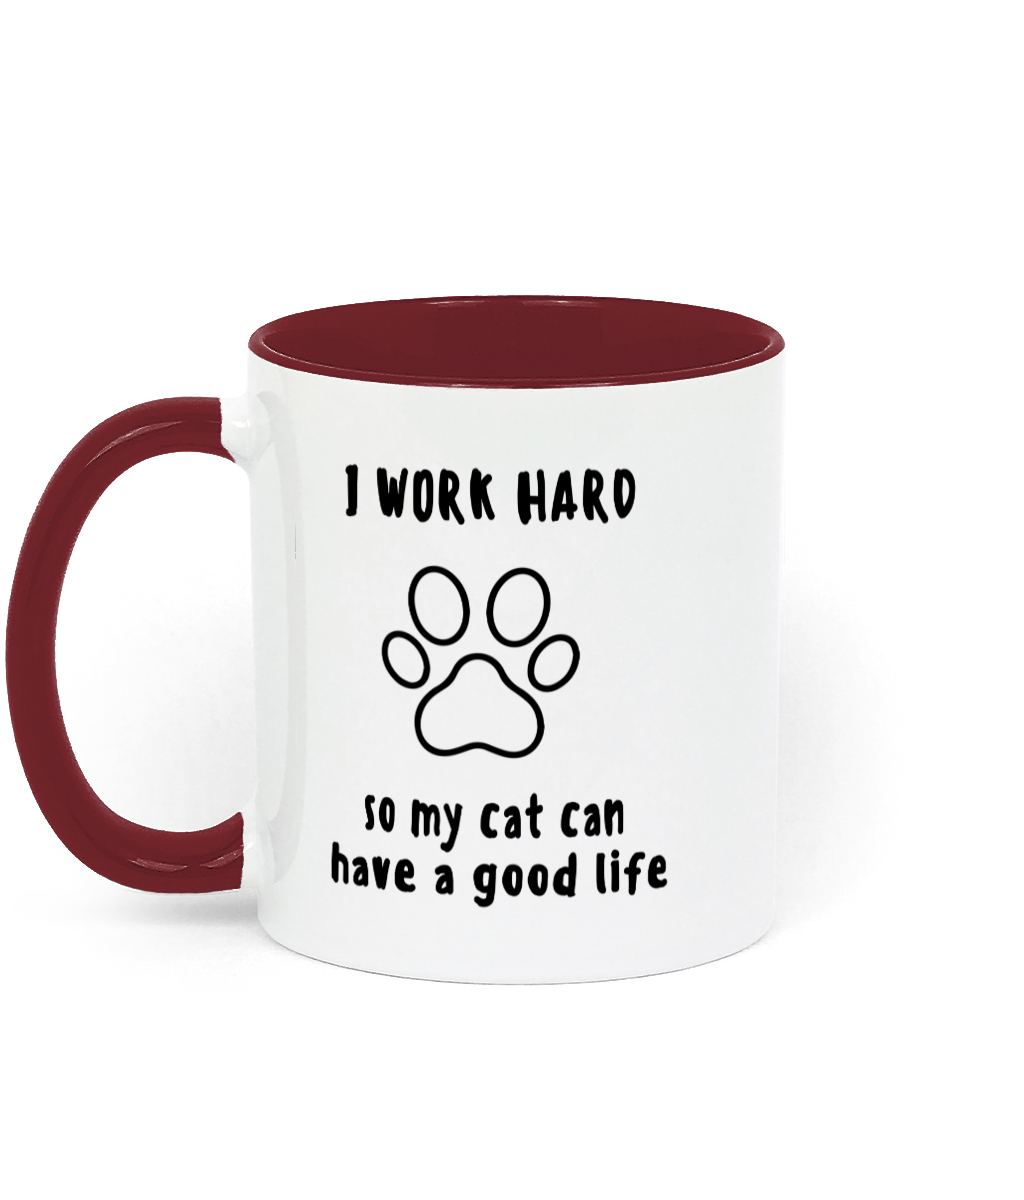 I Work Hard so My Cat Can Have a Good life. 11 oz mug. Cat Lover. Perfect Gift.Two-Toned.